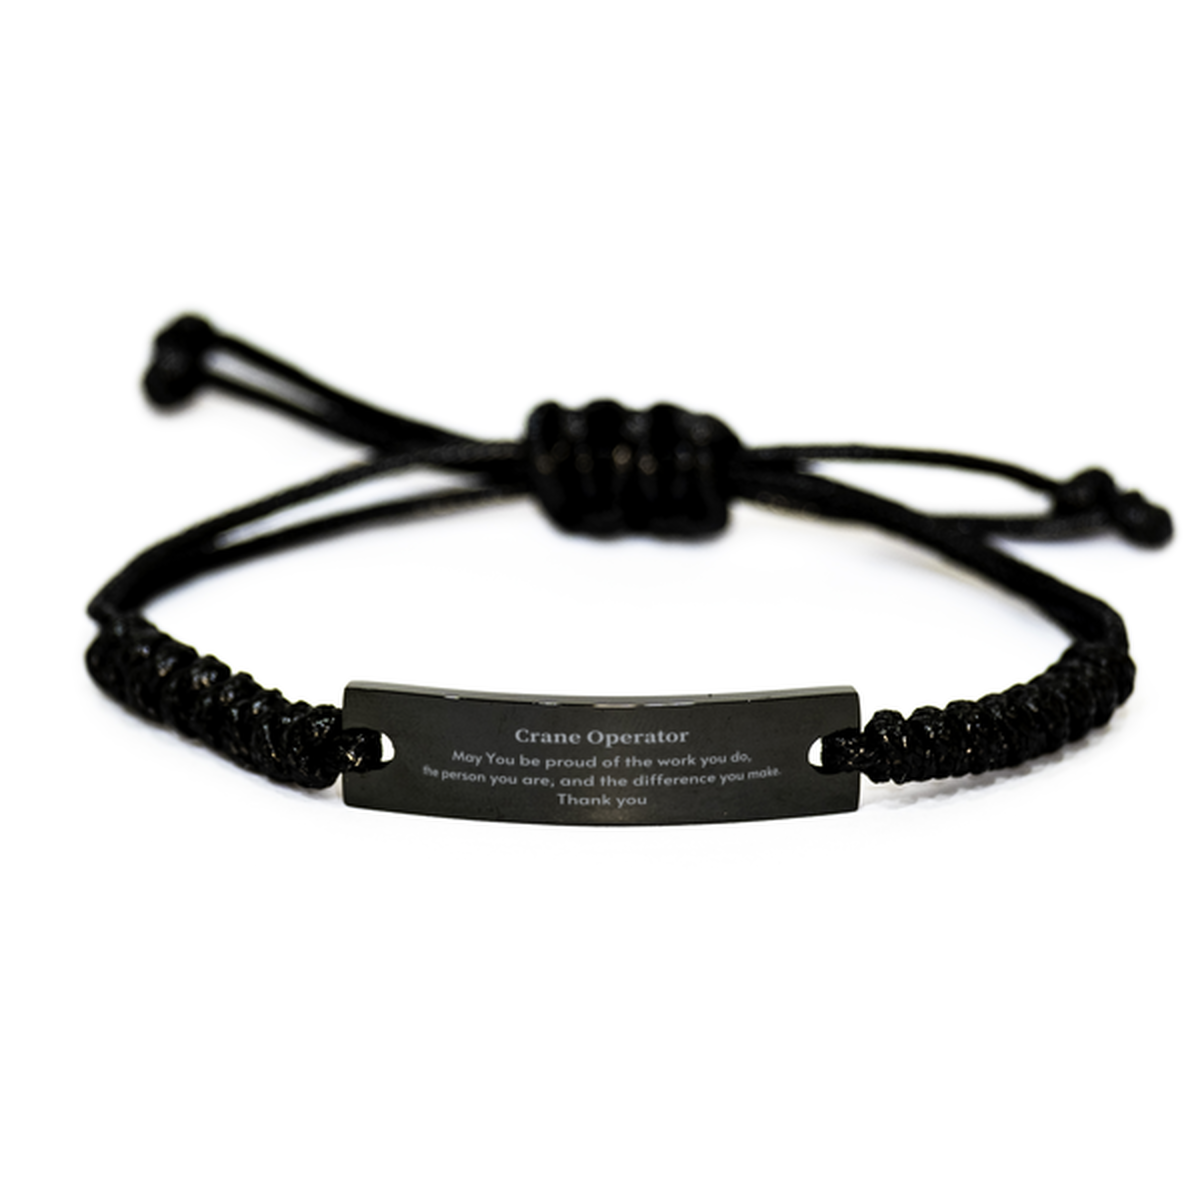 Heartwarming Black Rope Bracelet Retirement Coworkers Gifts for Crane Operator, Crane Operator May You be proud of the work you do, the person you are Gifts for Boss Men Women Friends